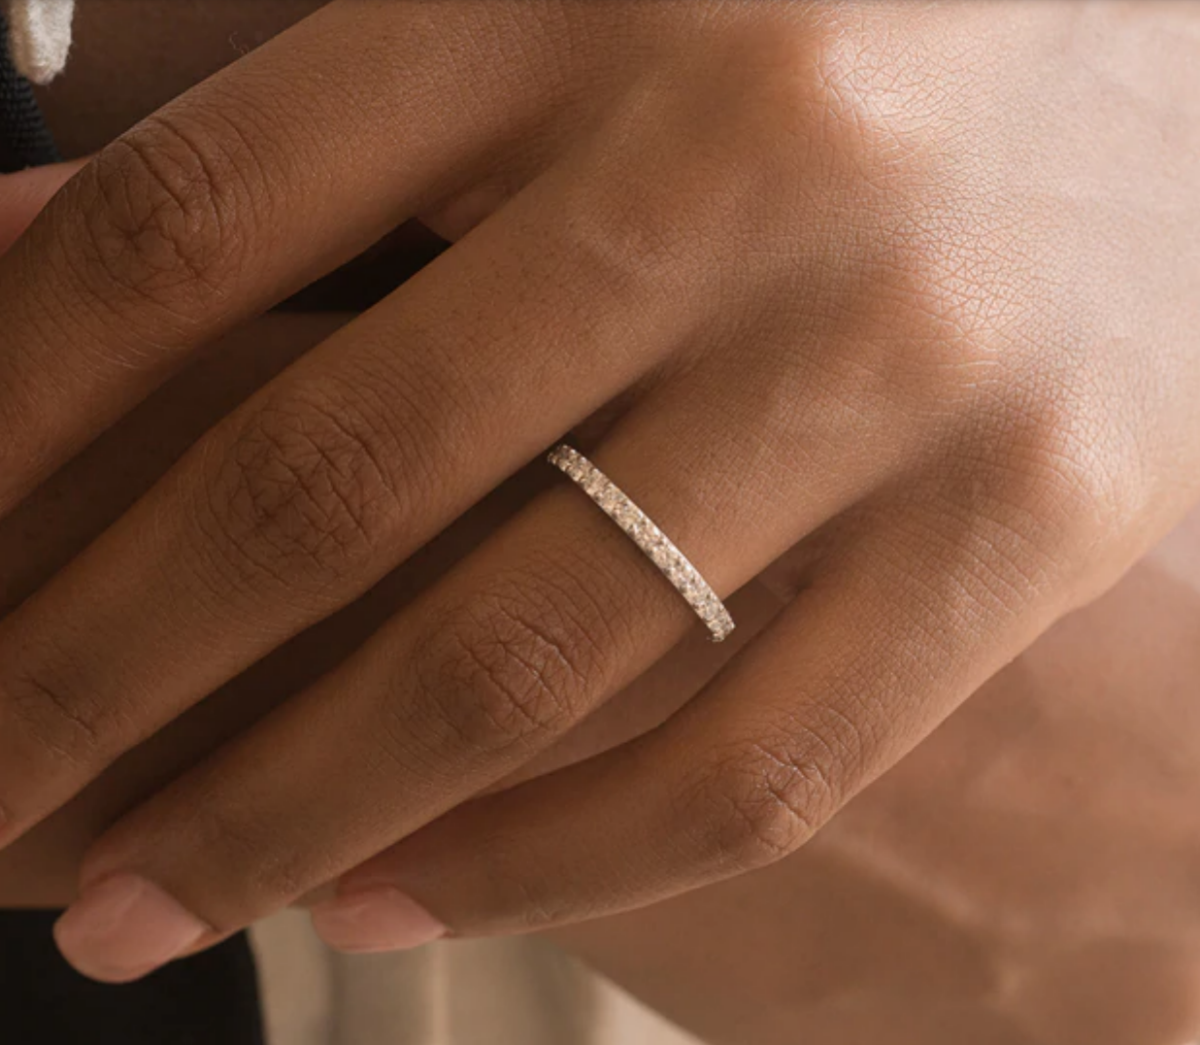 Stand out from the crowd with a Noemie wedding band